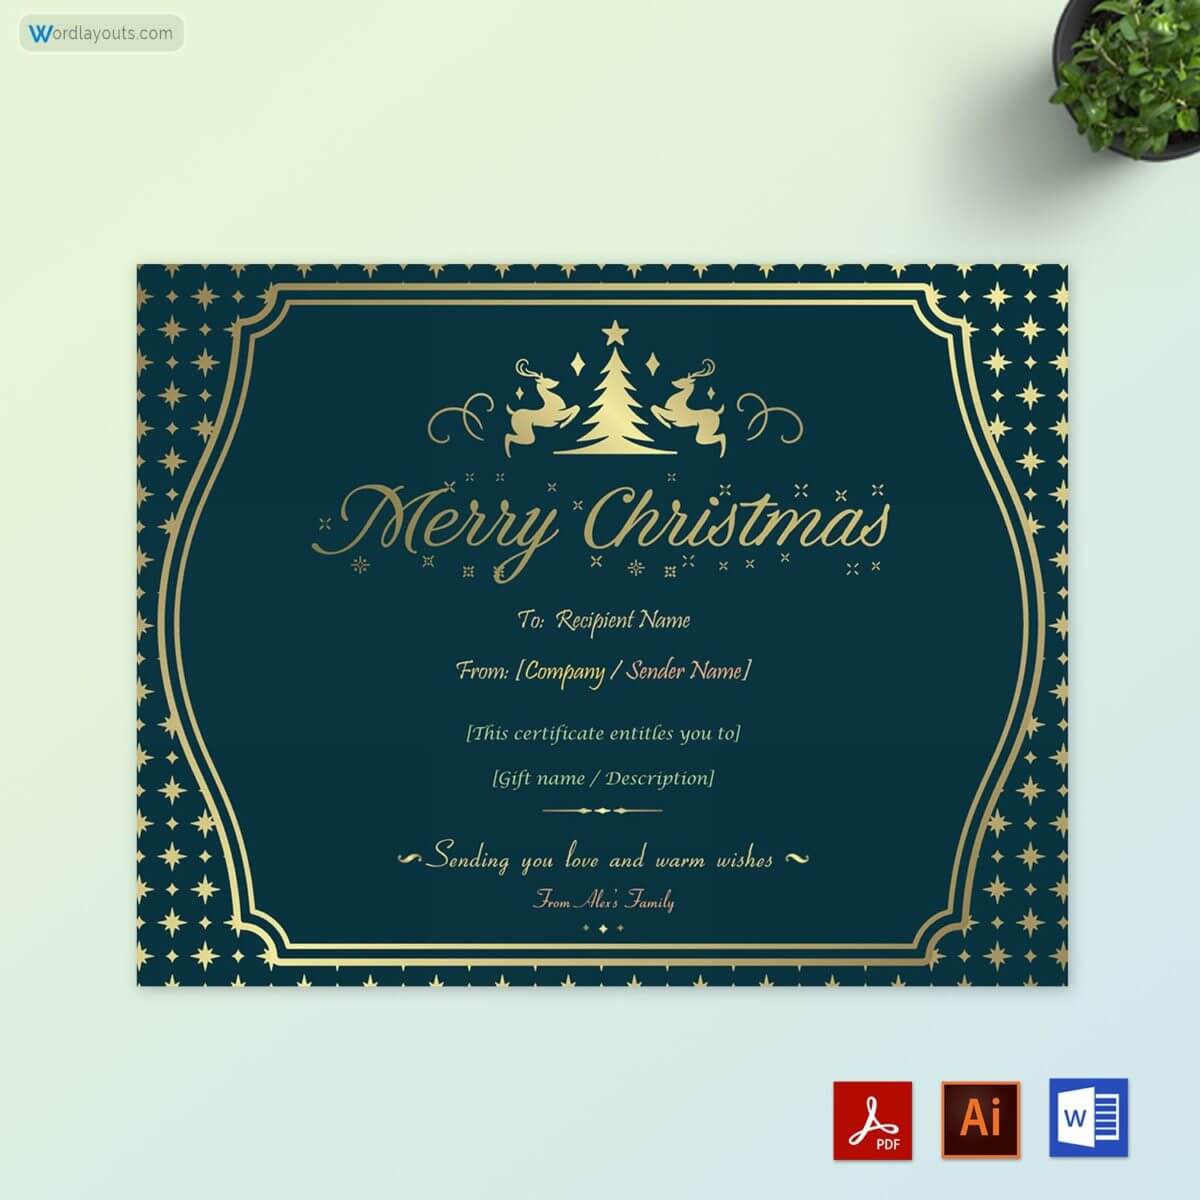 Free Downloadable Christmas Gift Certificate Template 12 for Word, Adobe and AI Format